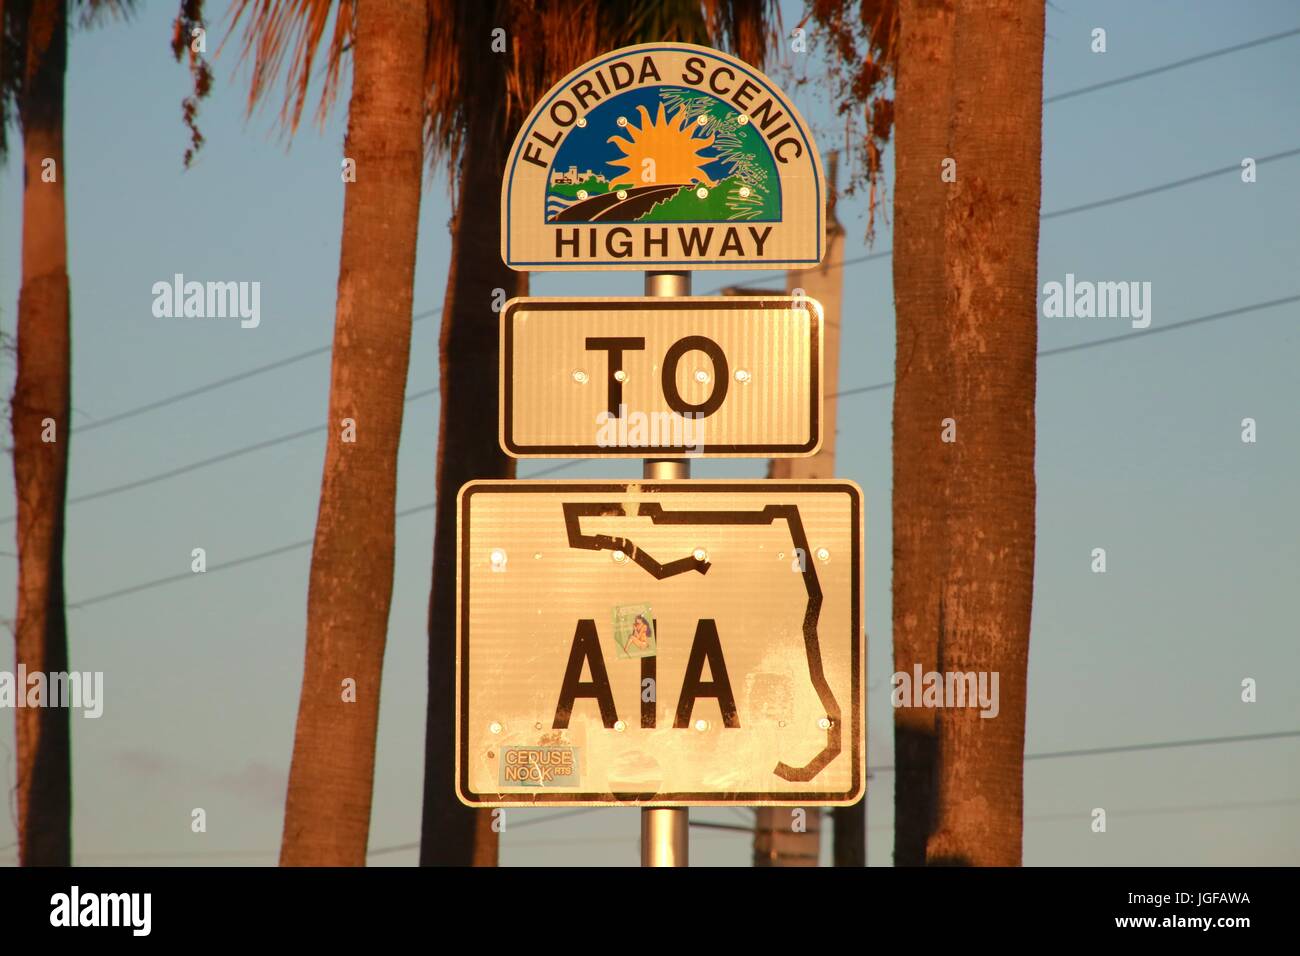 Florida Scenic Highway to A1A Sign at Sunset Framed by Two Palm Tree Trunks Stock Photo